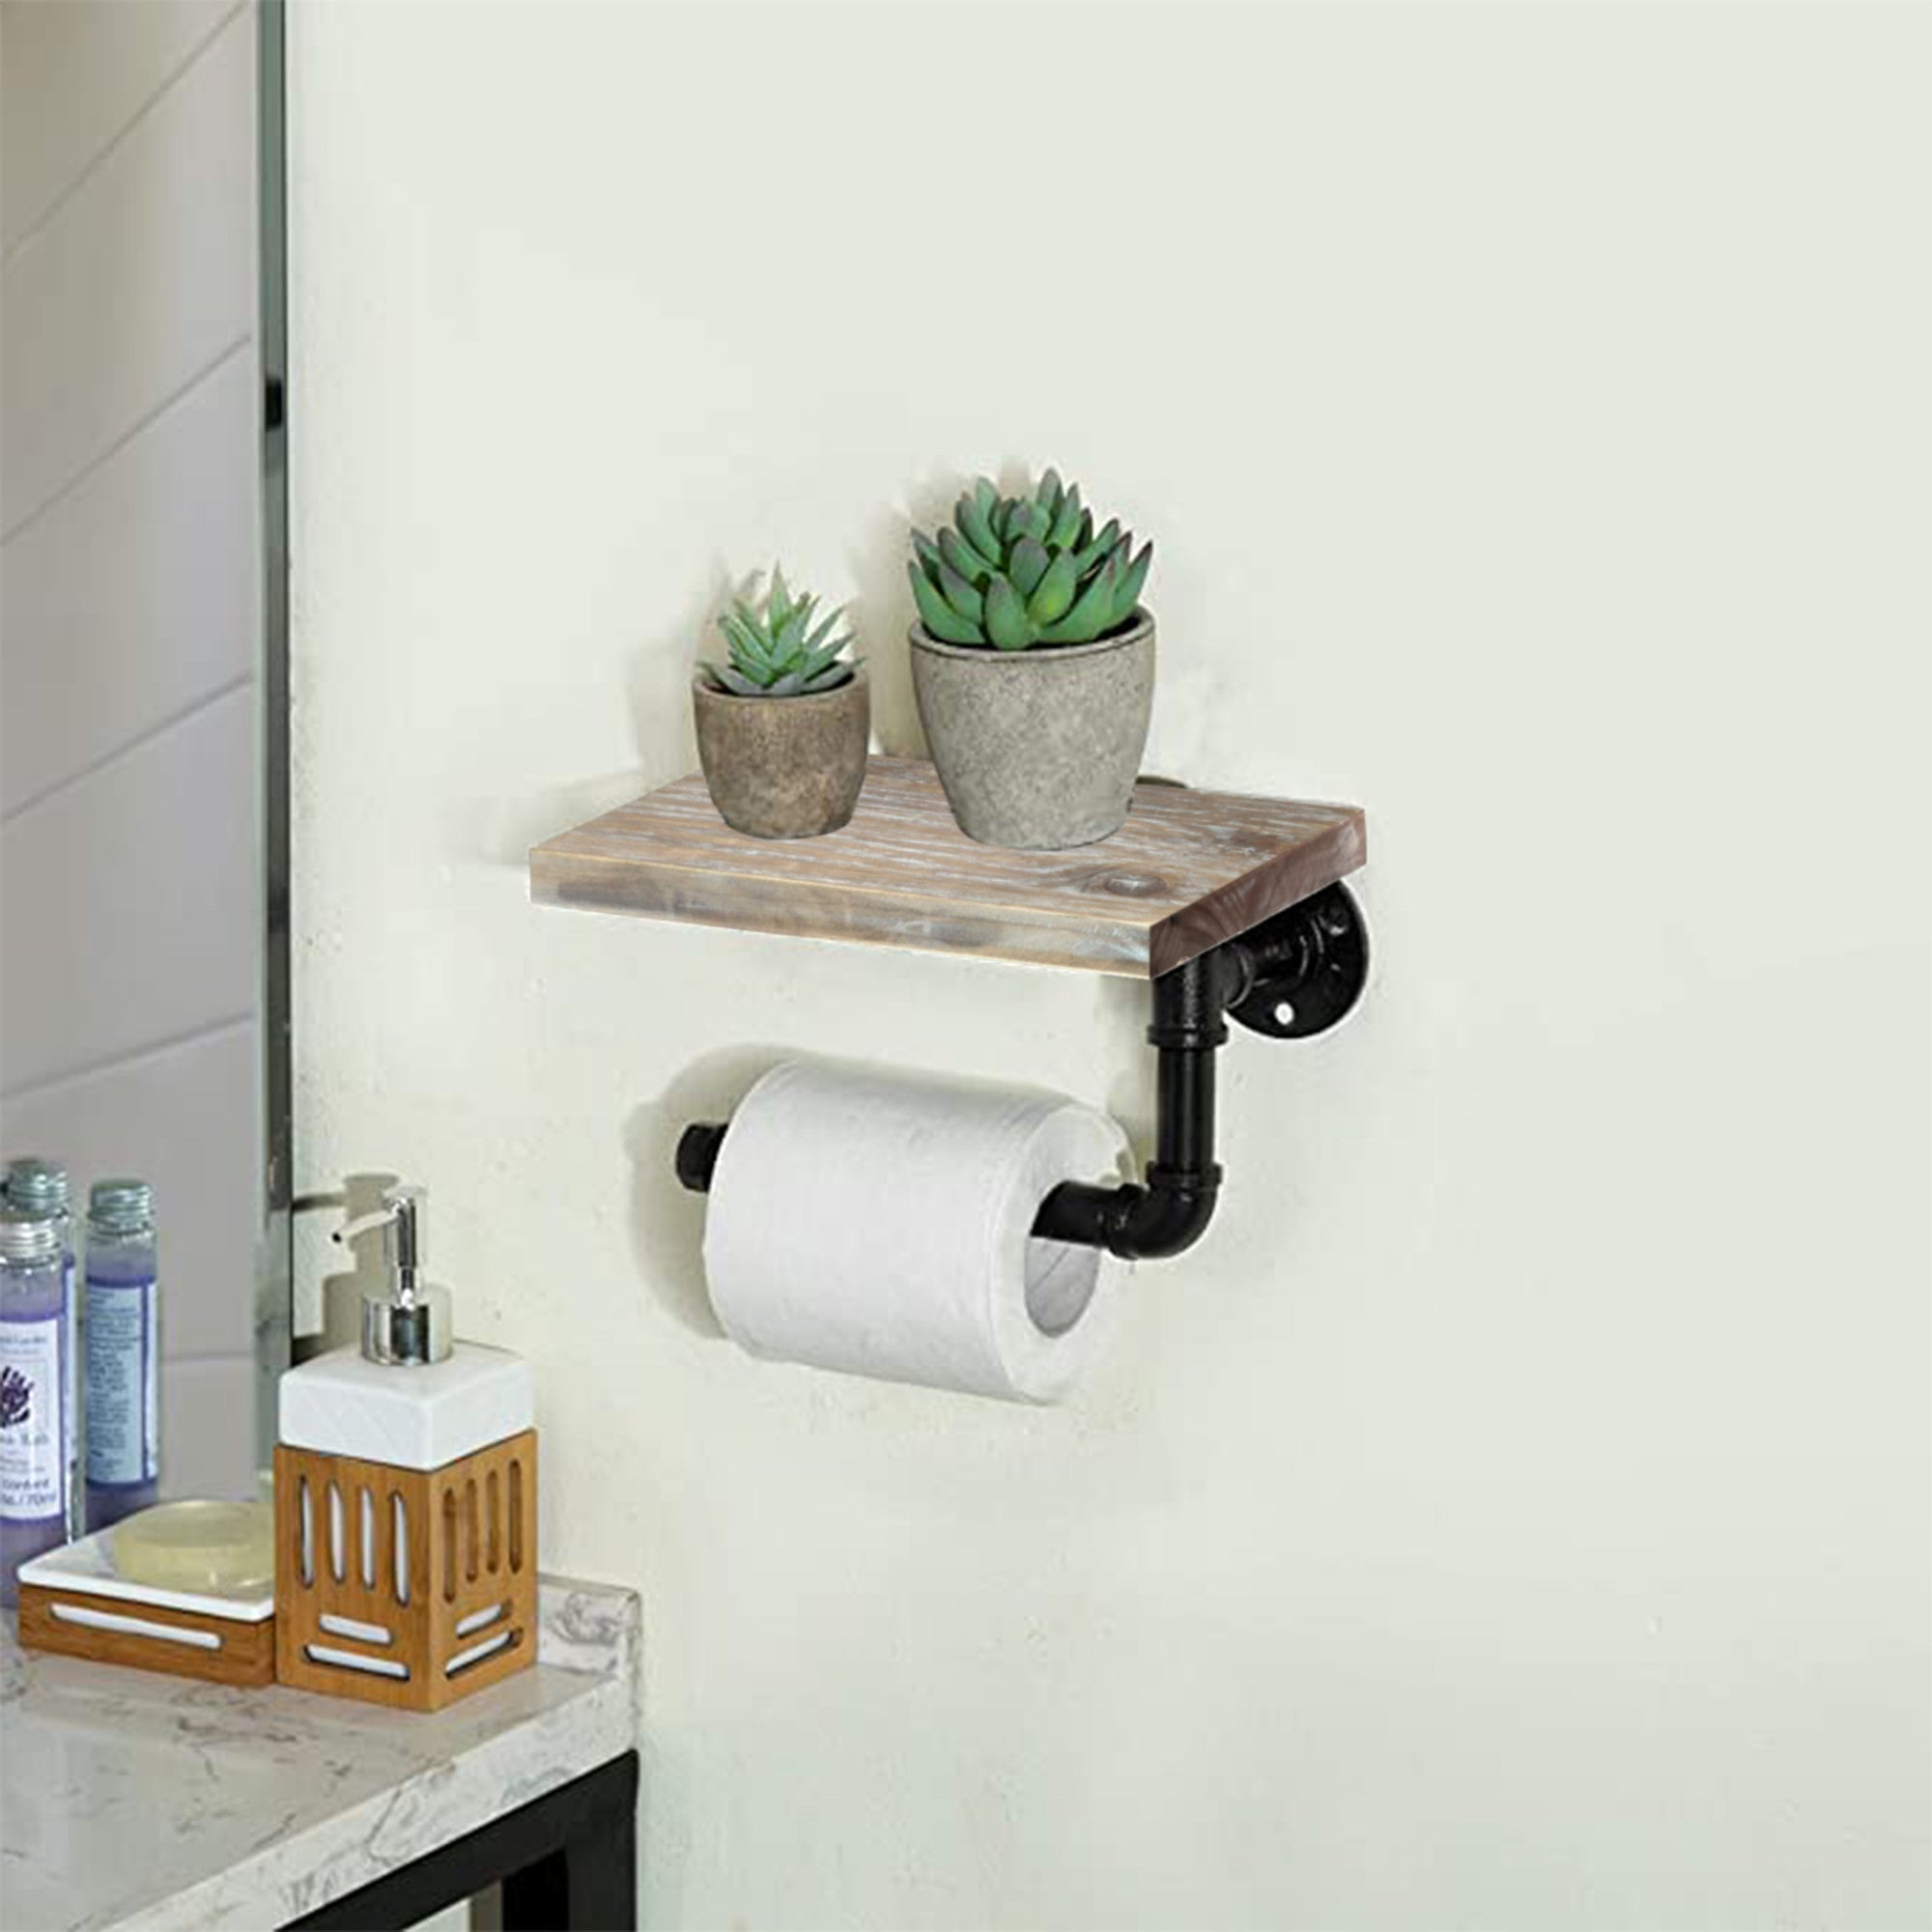 Pipe Toilet Paper Hanger - [9.8 in - Rustic Brown] Industrial Toilet Paper Holder with Shelf,  Wall Mount Toilet Paper Holder